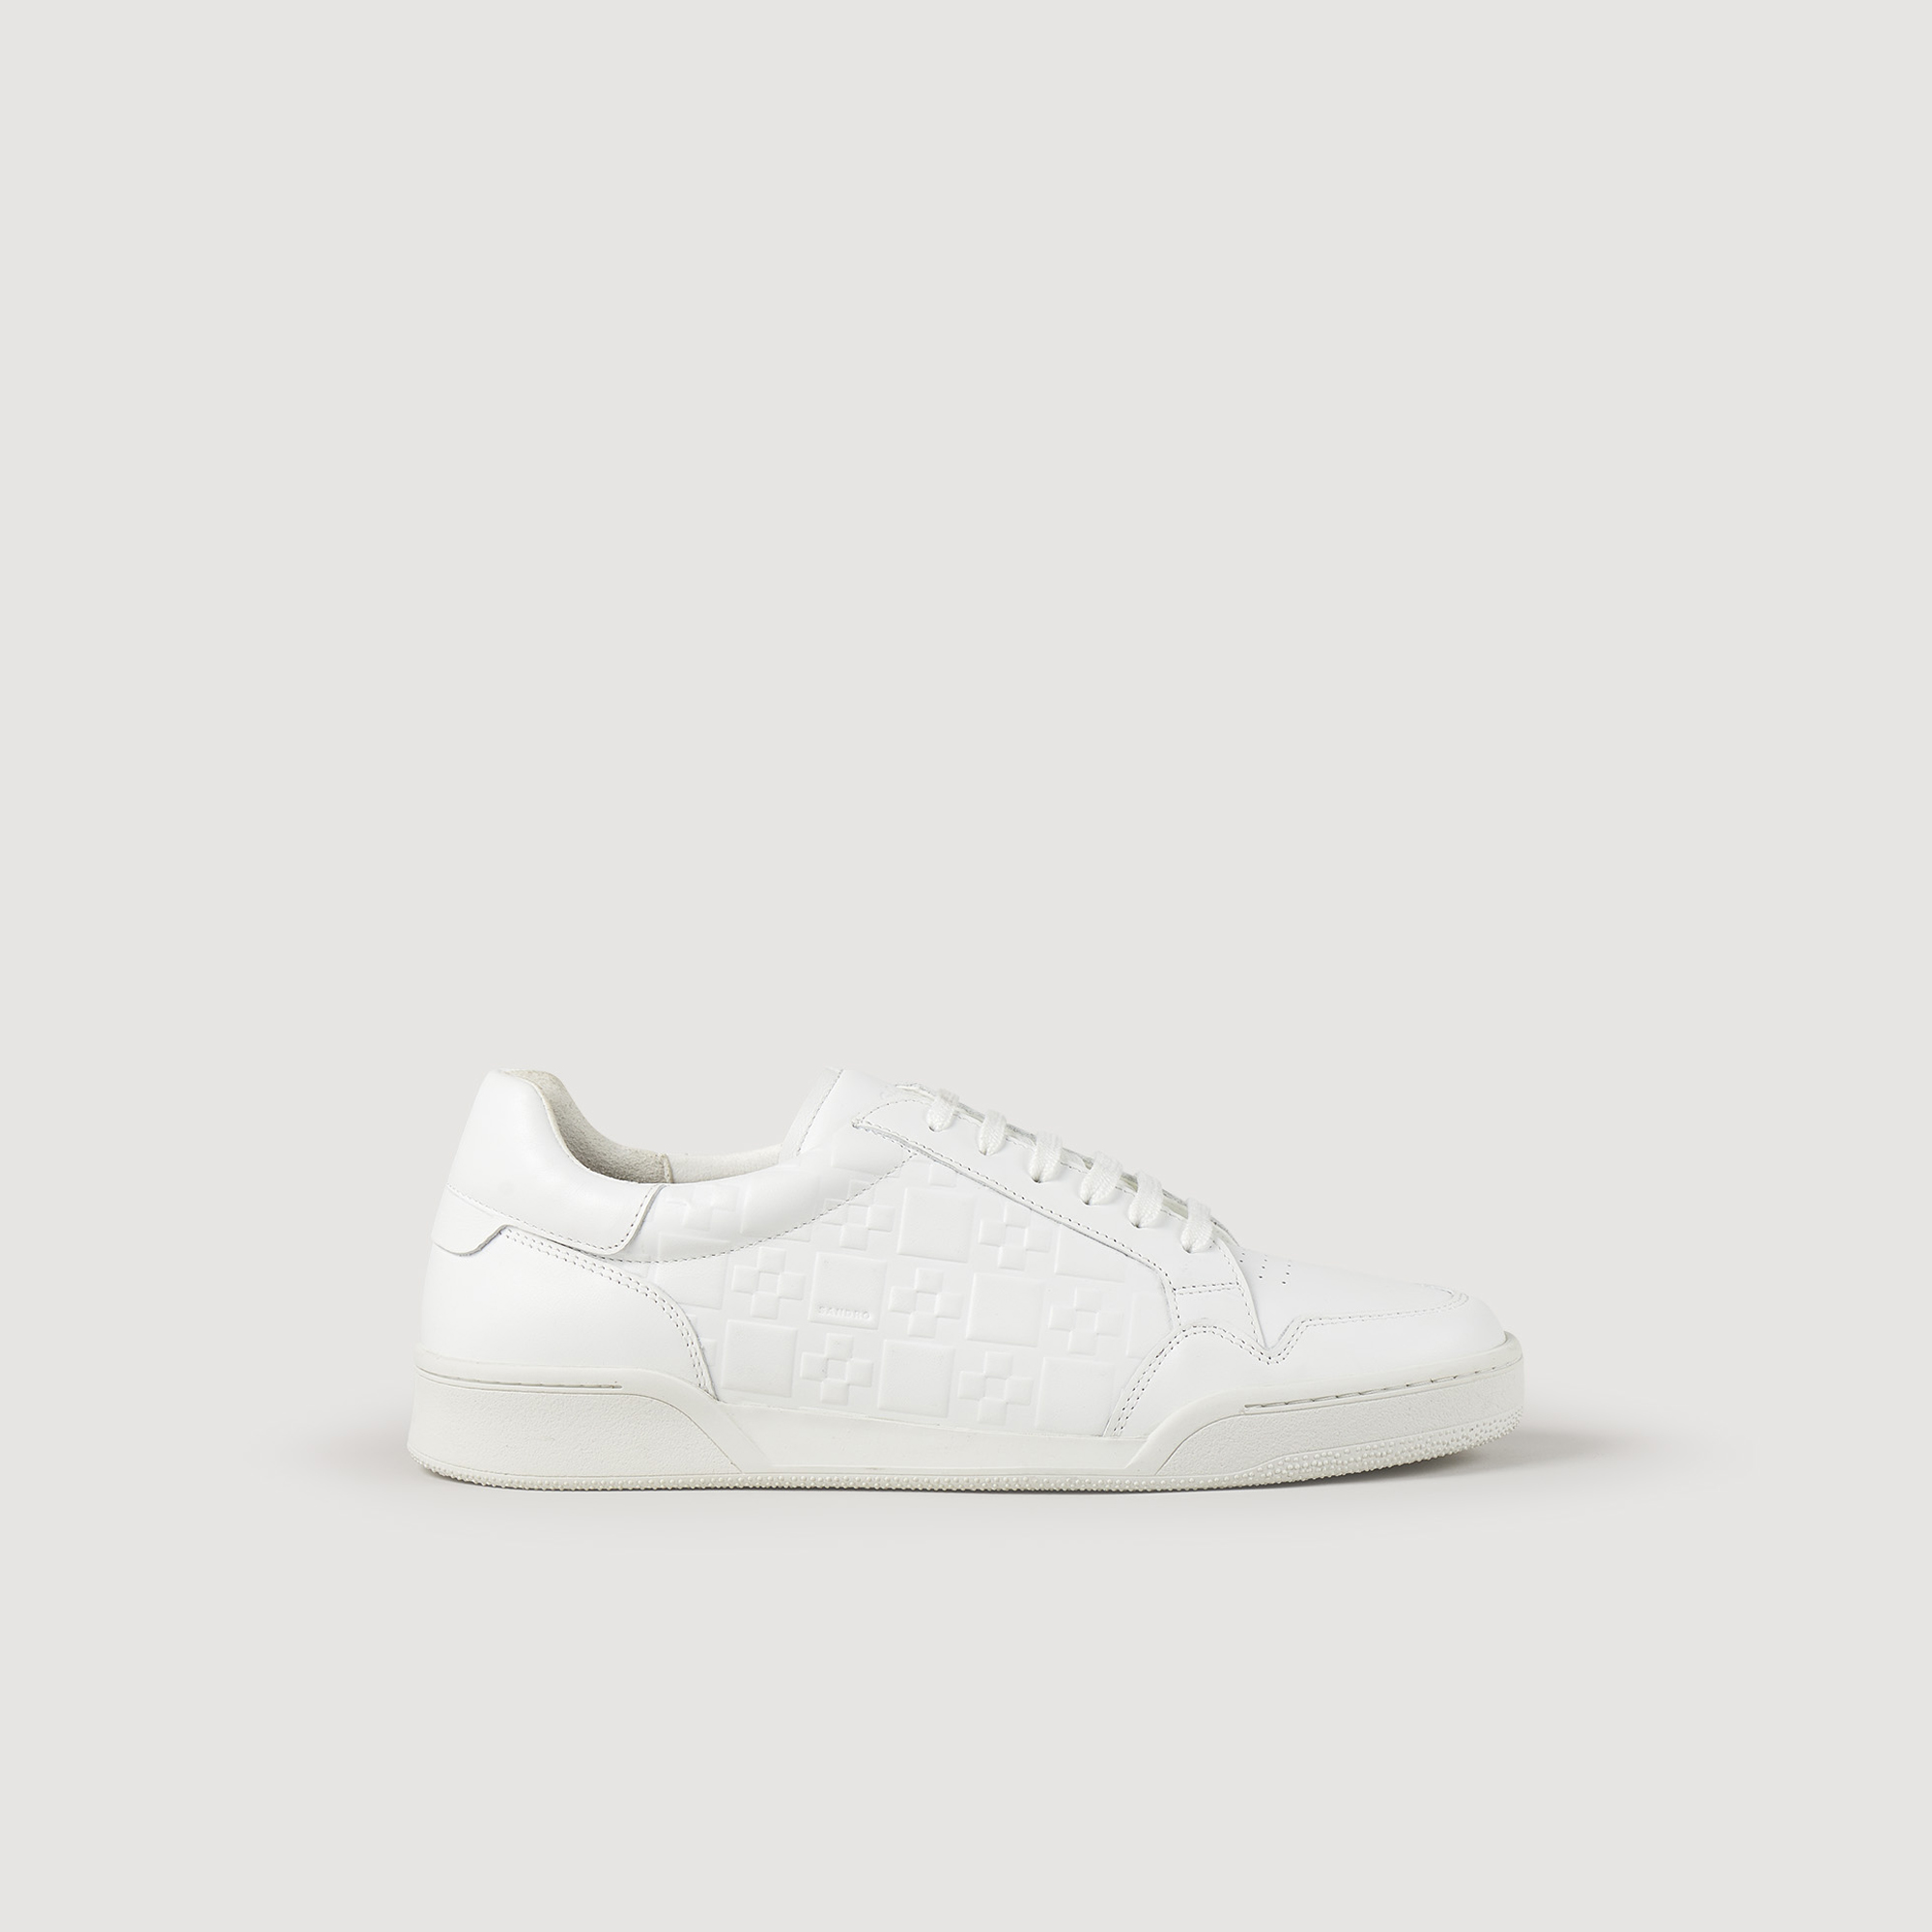 Sandro rubber Embossed leather sneakers with a signature square cross motif, a lace-up fastening, and a front tongue